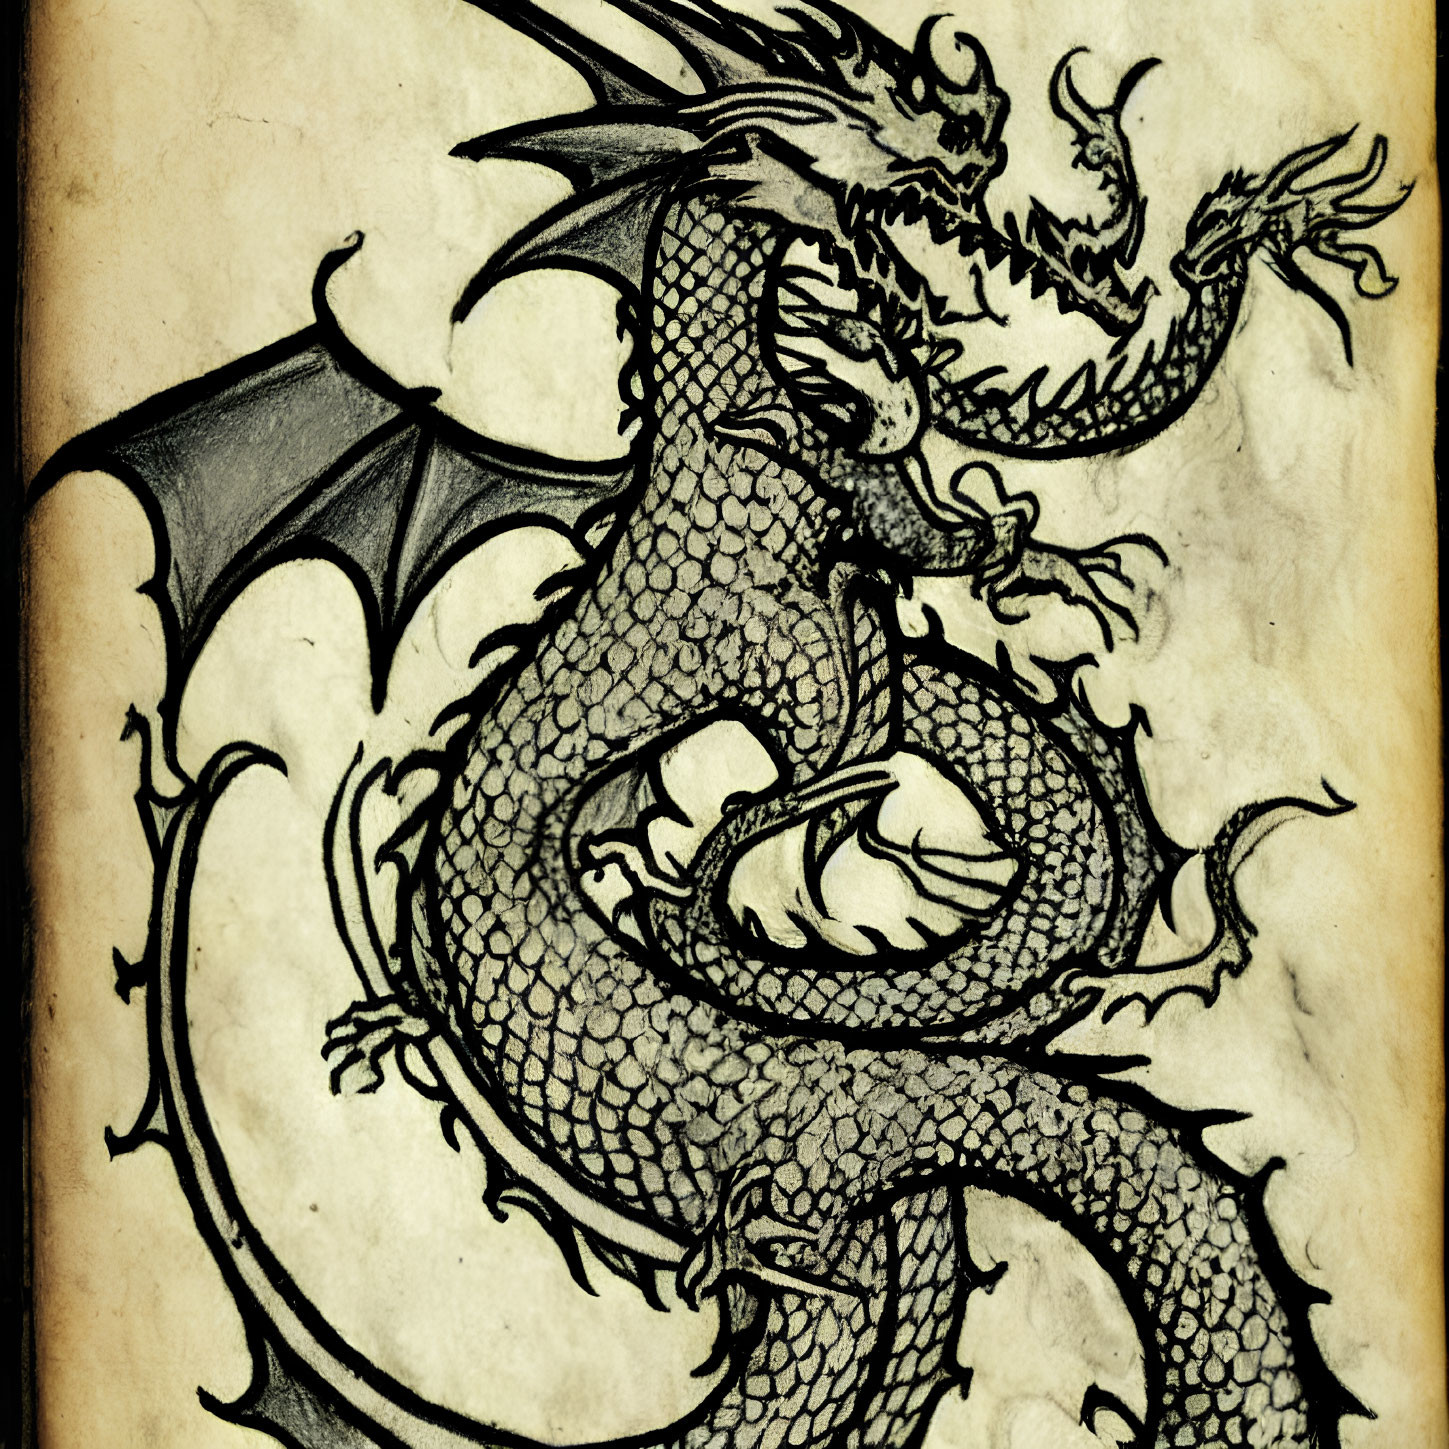 Detailed black ink drawing of traditional eastern dragon on aged parchment